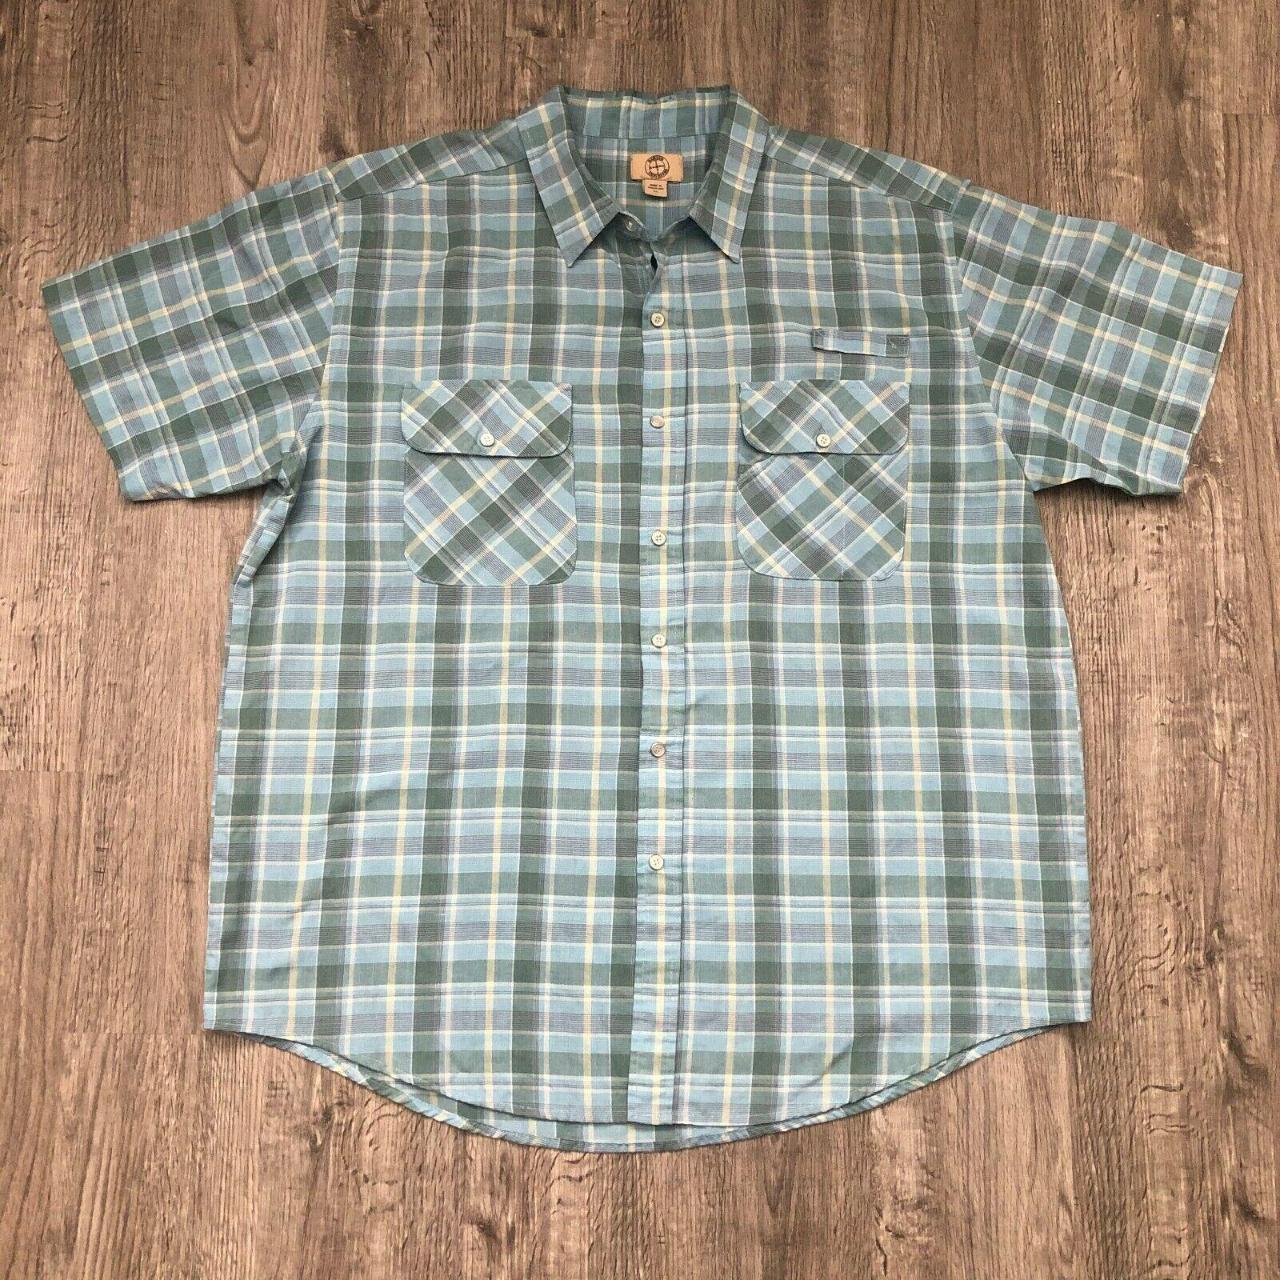 Haband Men's Blue and Green Shirt